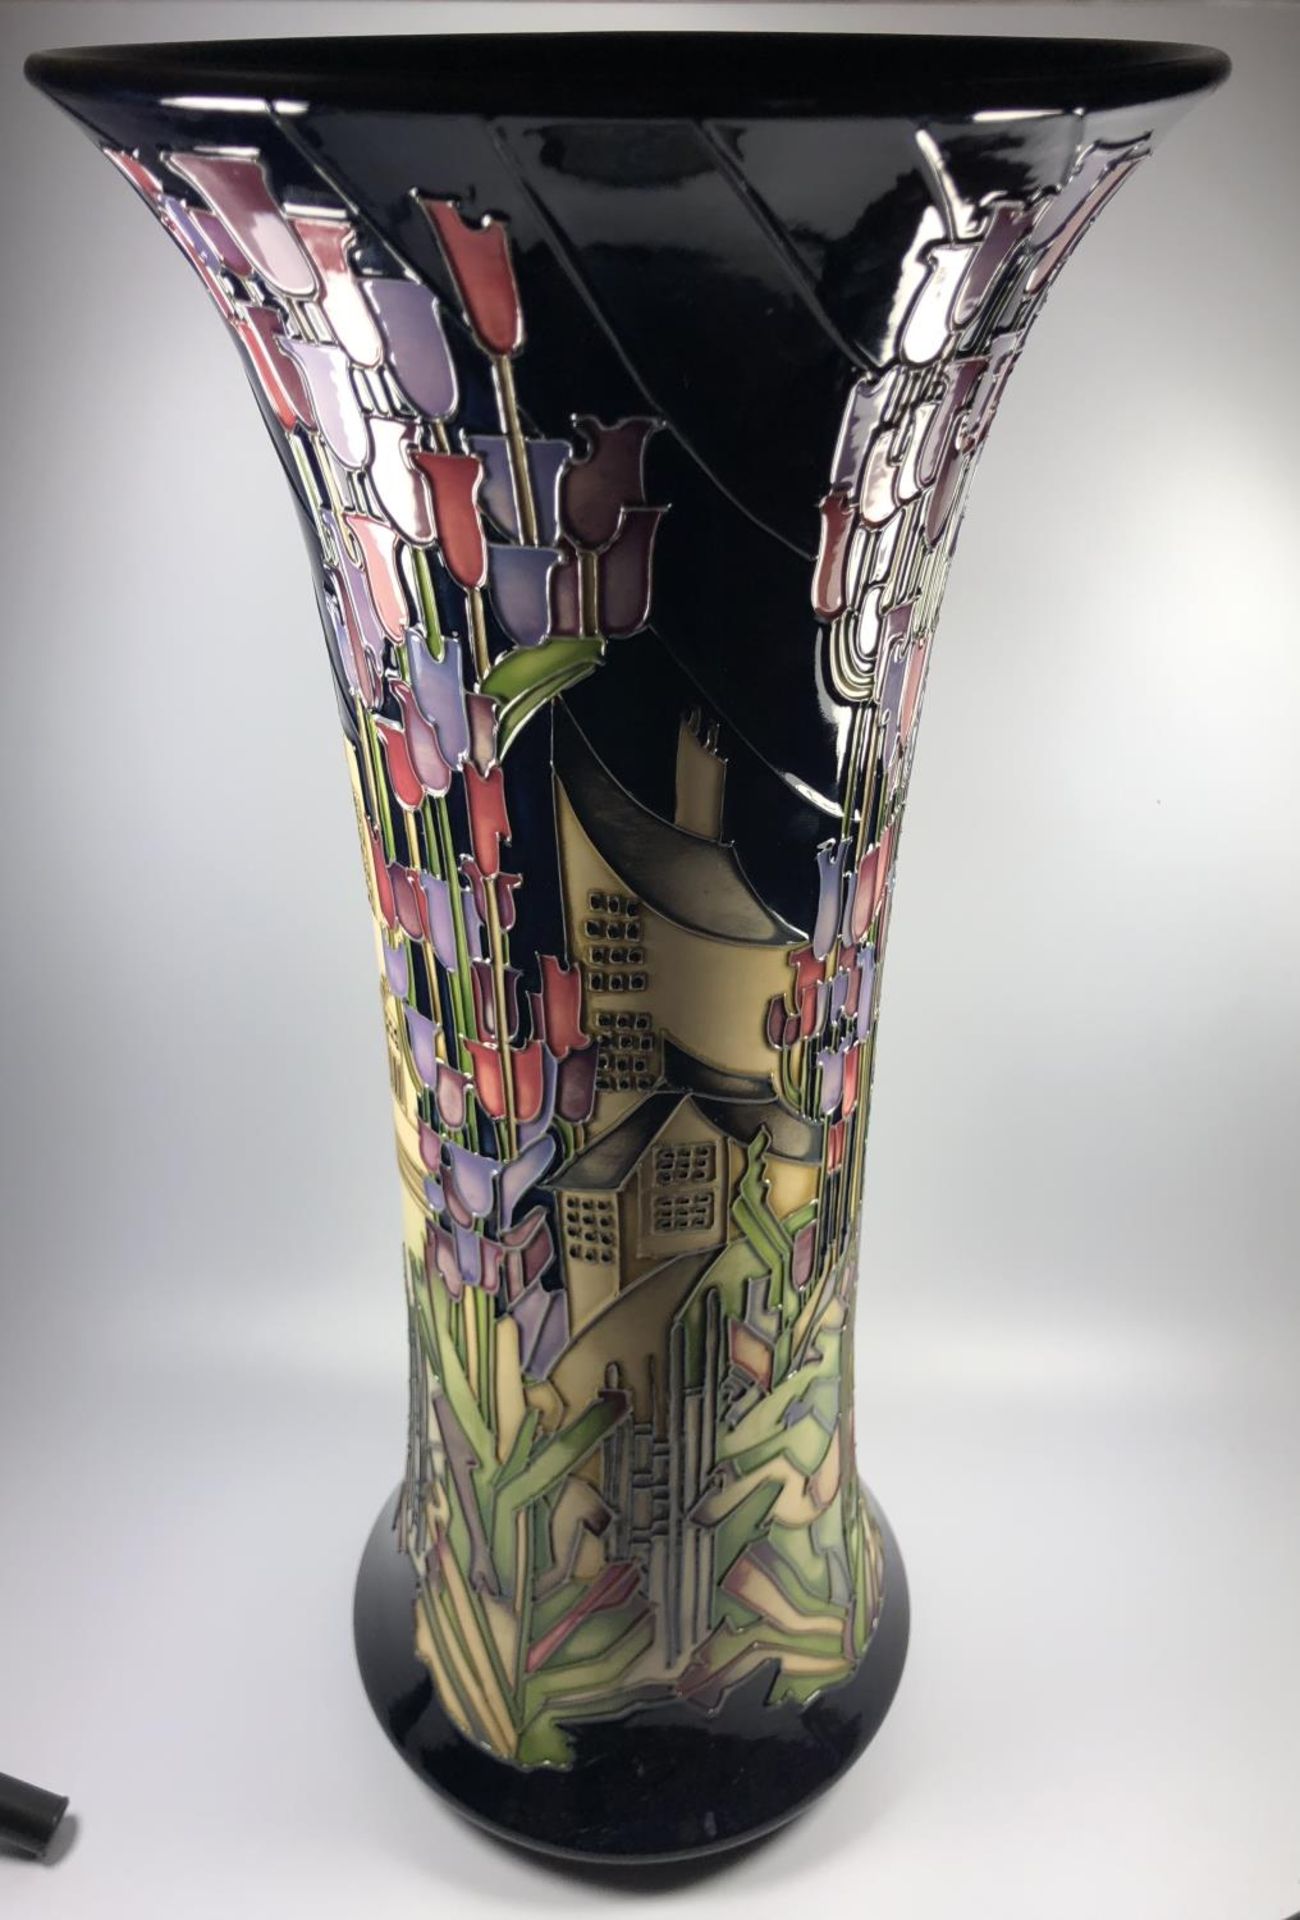 A PRESTIGE MOORCROFT POTTERY 'TOWN OF FLOWERS' VASE, HEIGHT 47CM, R.R.P £3500